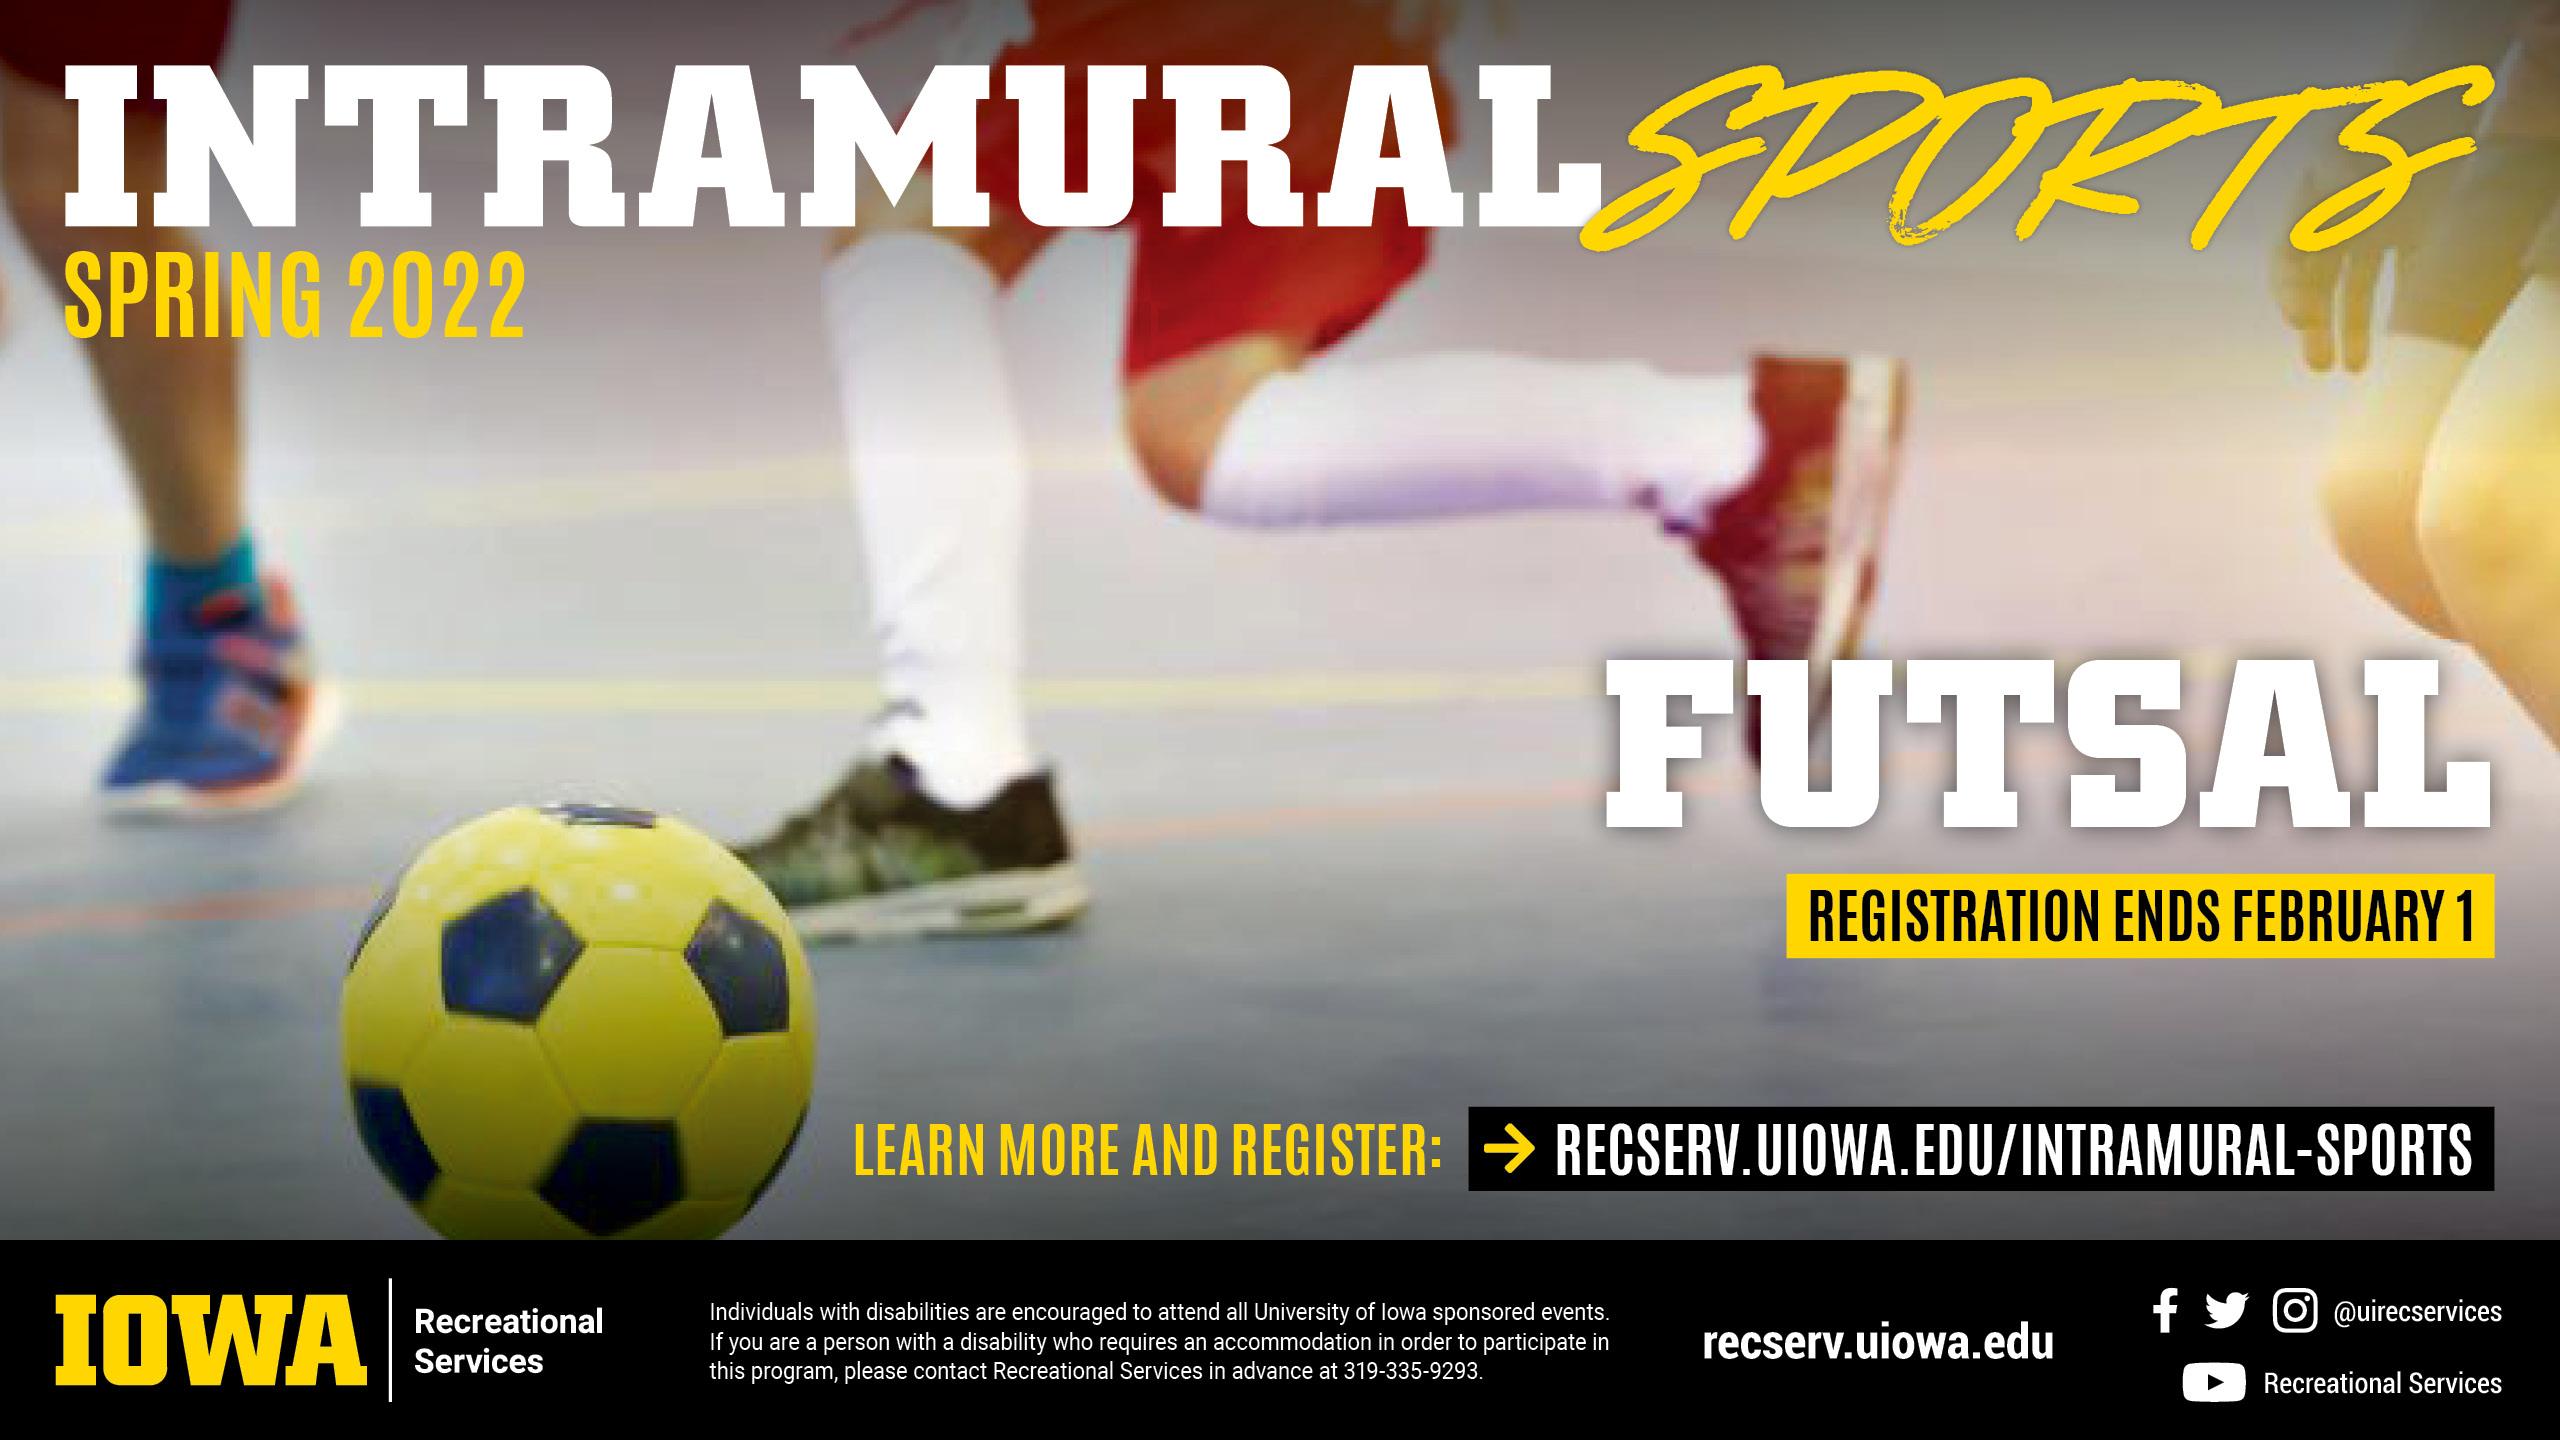 Intramural Sports Spring 2022 Futsal Registration ends February 1 learn more and register at: recserv.uiowa.edu/intramural-sports